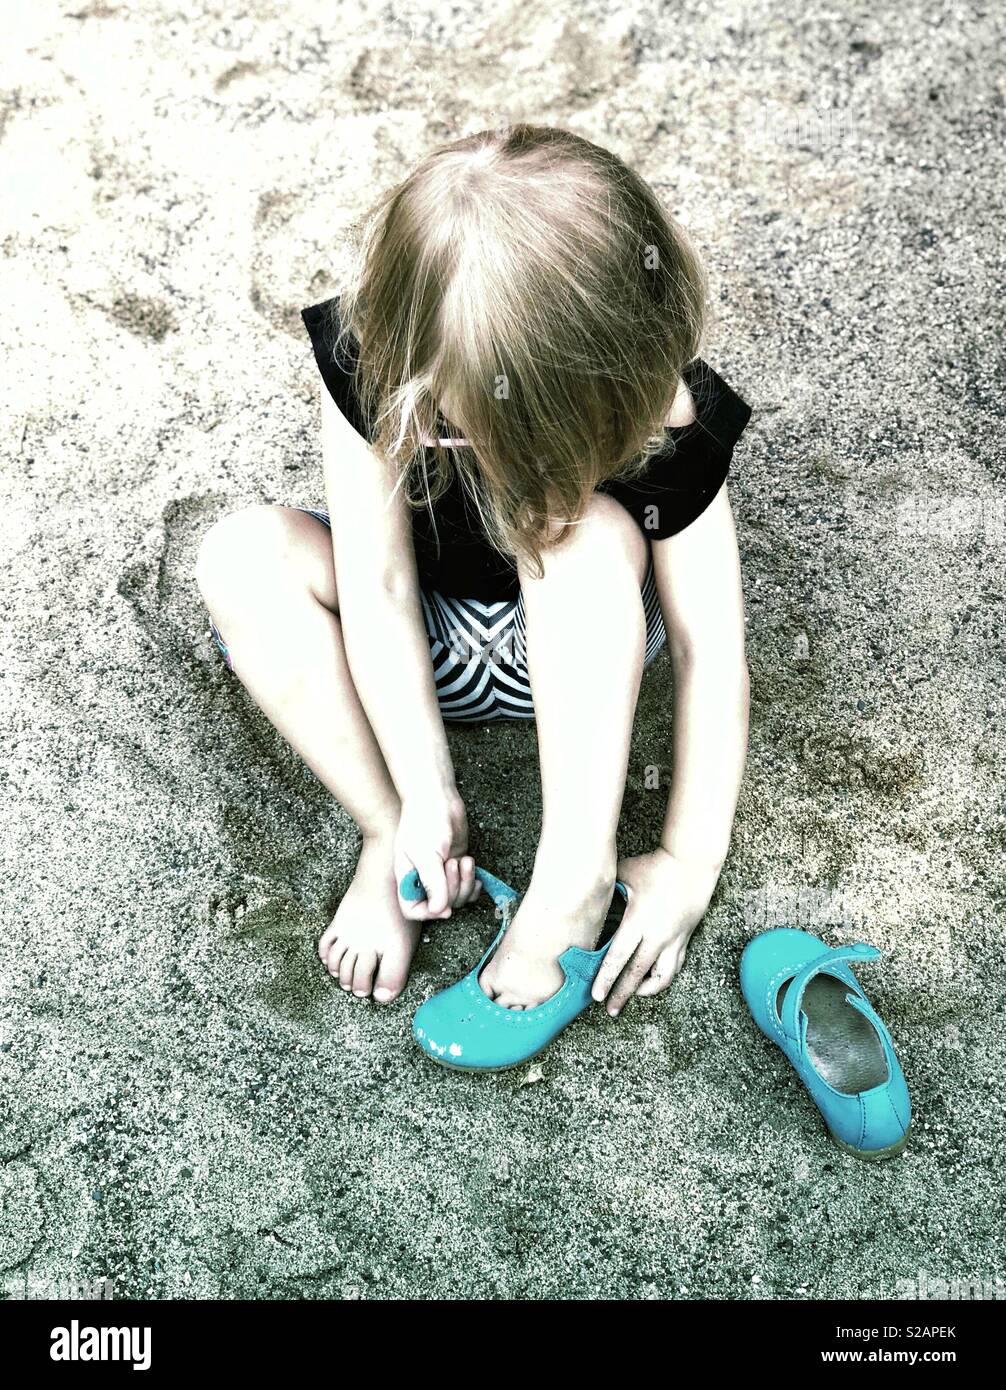 2 year old little girl sitting in sand putting her shoes on Stock Photo